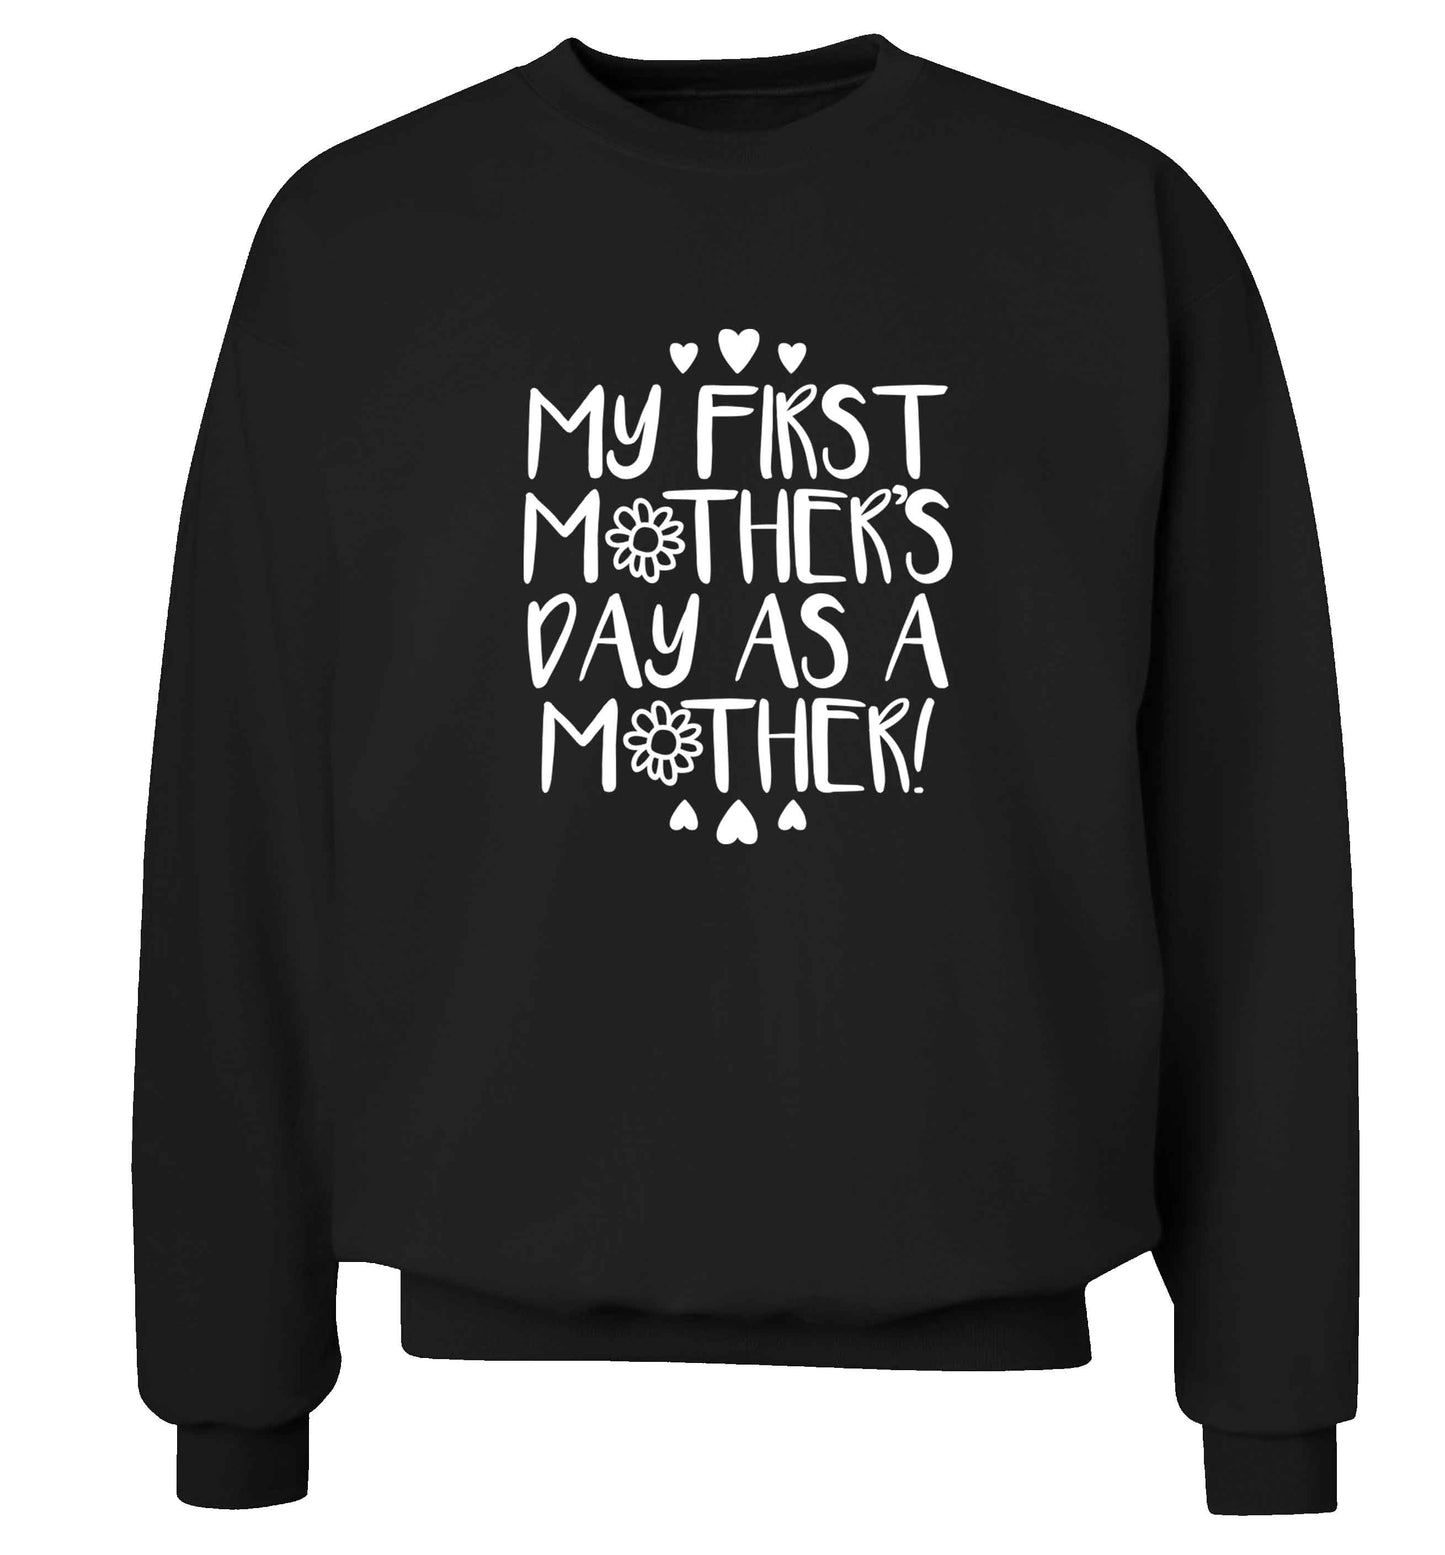 It's my first mother's day as a mother adult's unisex black sweater 2XL